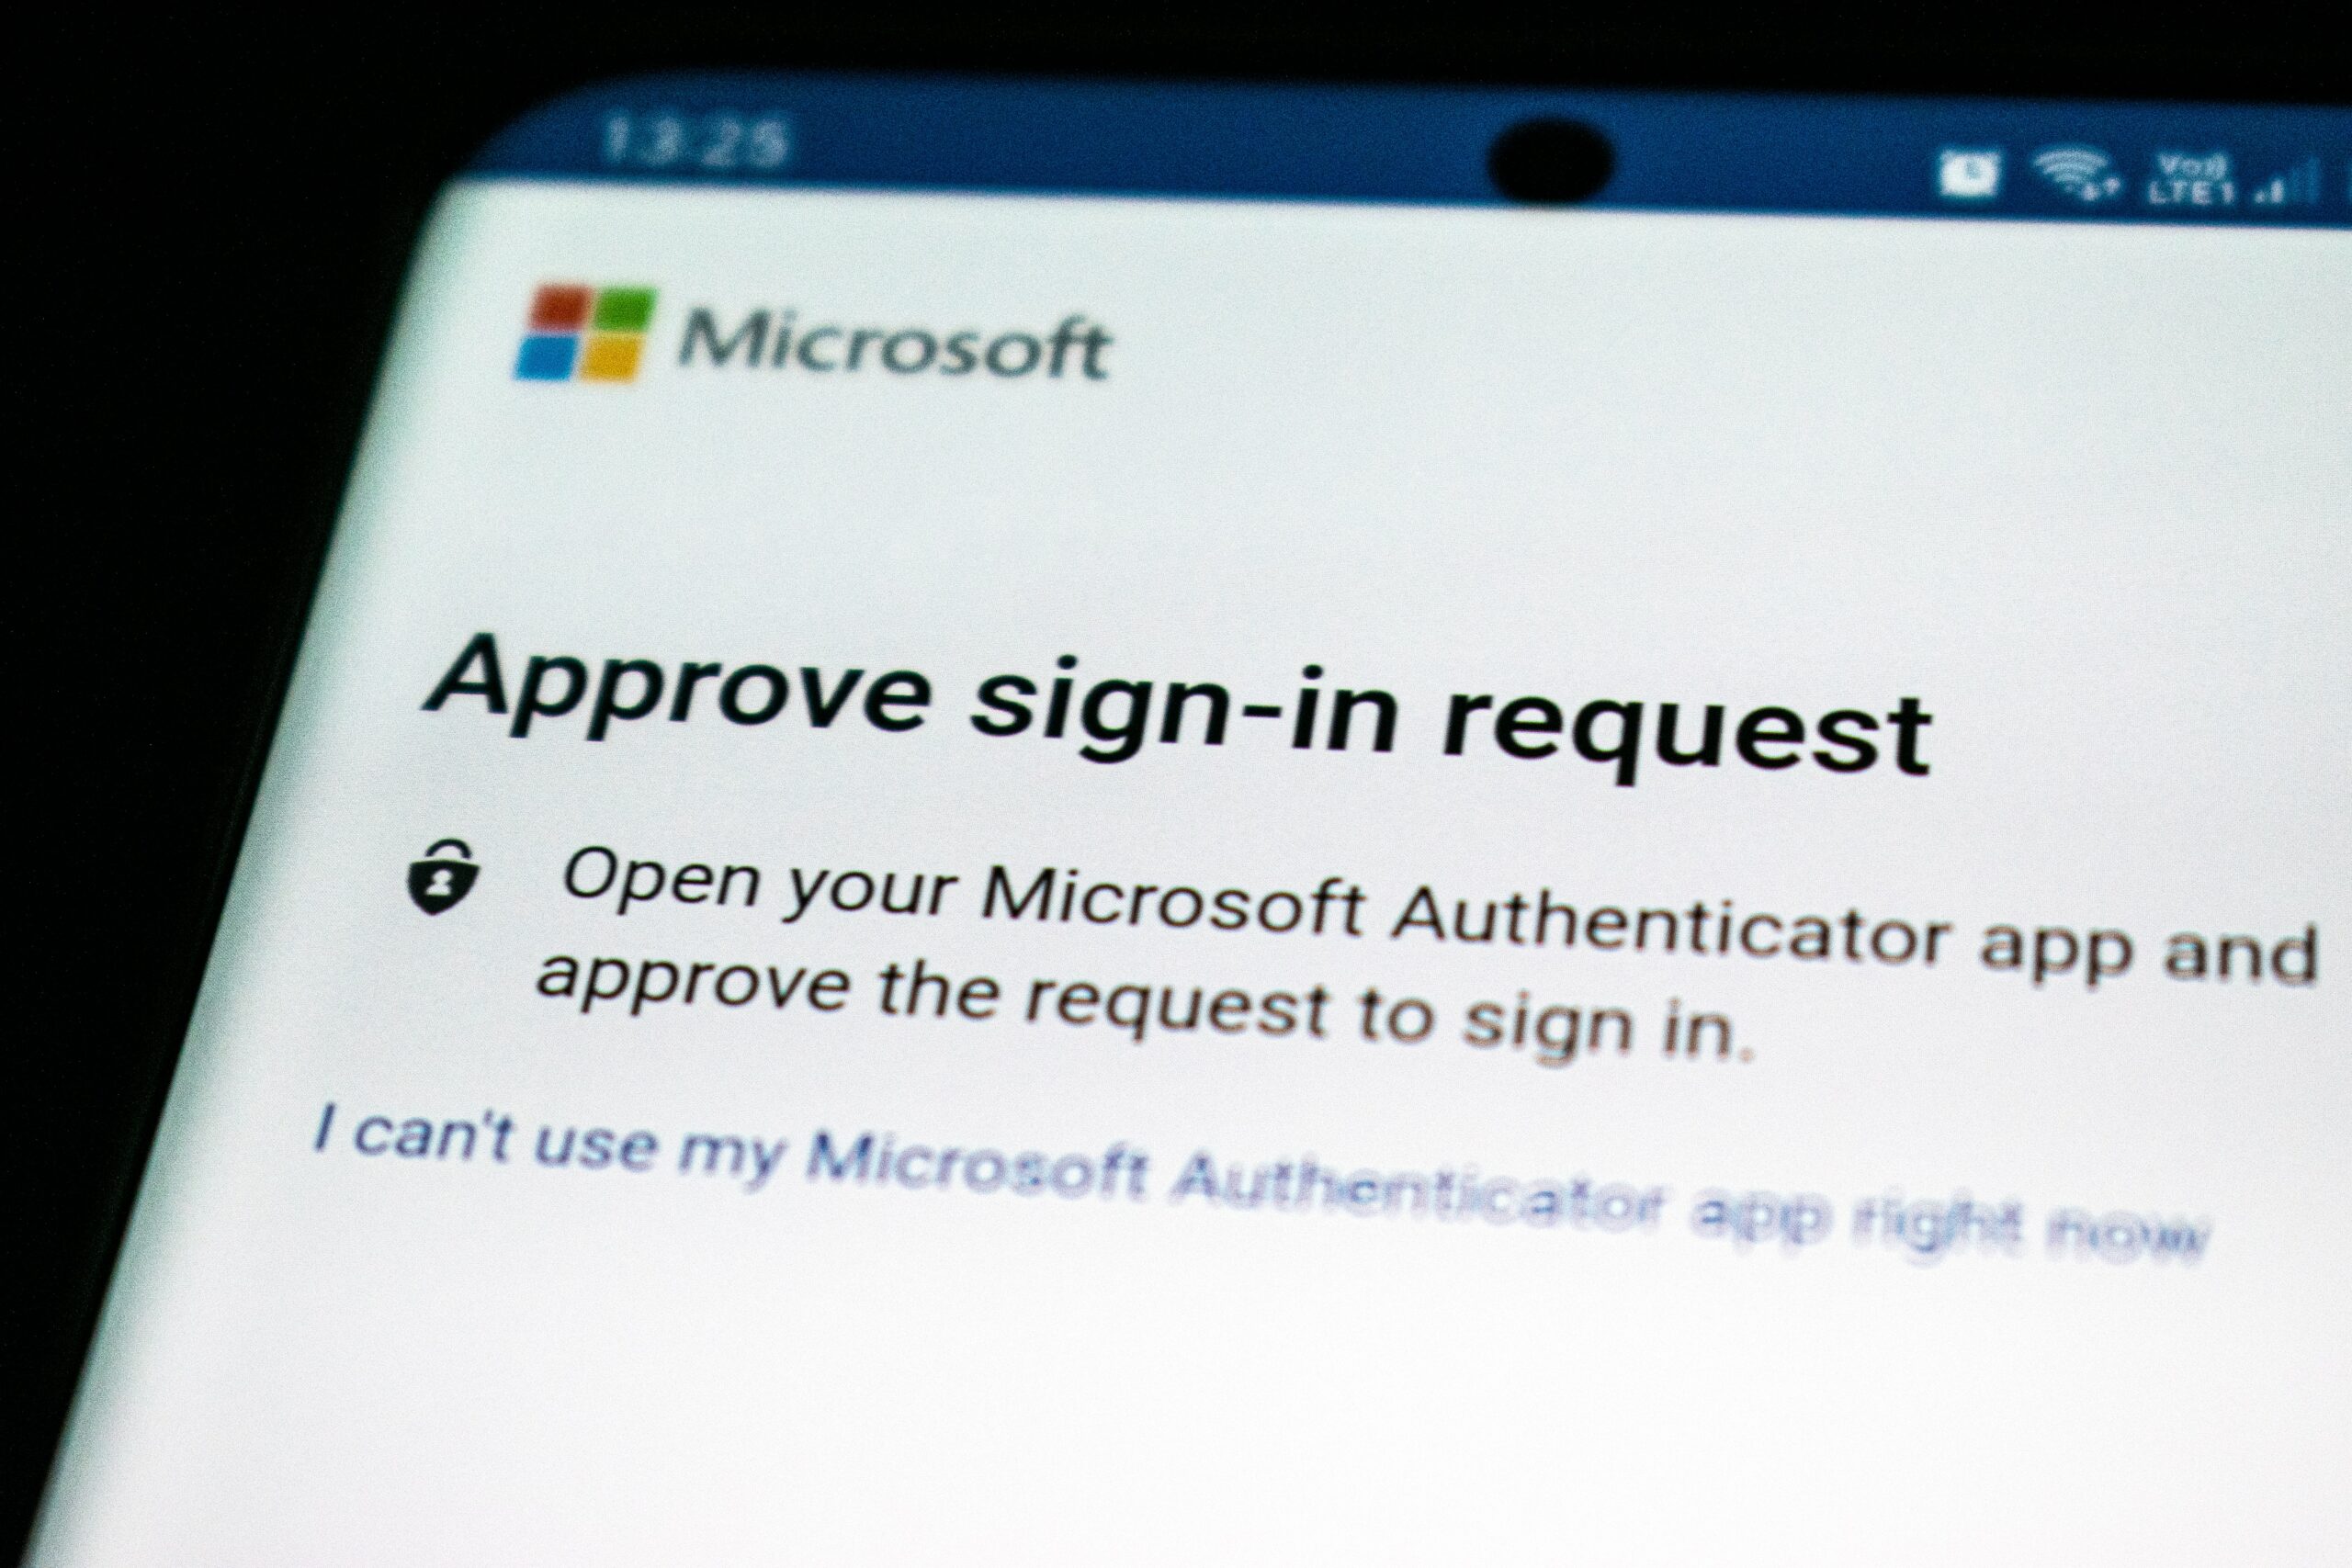 A smartphone displays Microsoft's sign-in request utilizing 2 factor authentication.